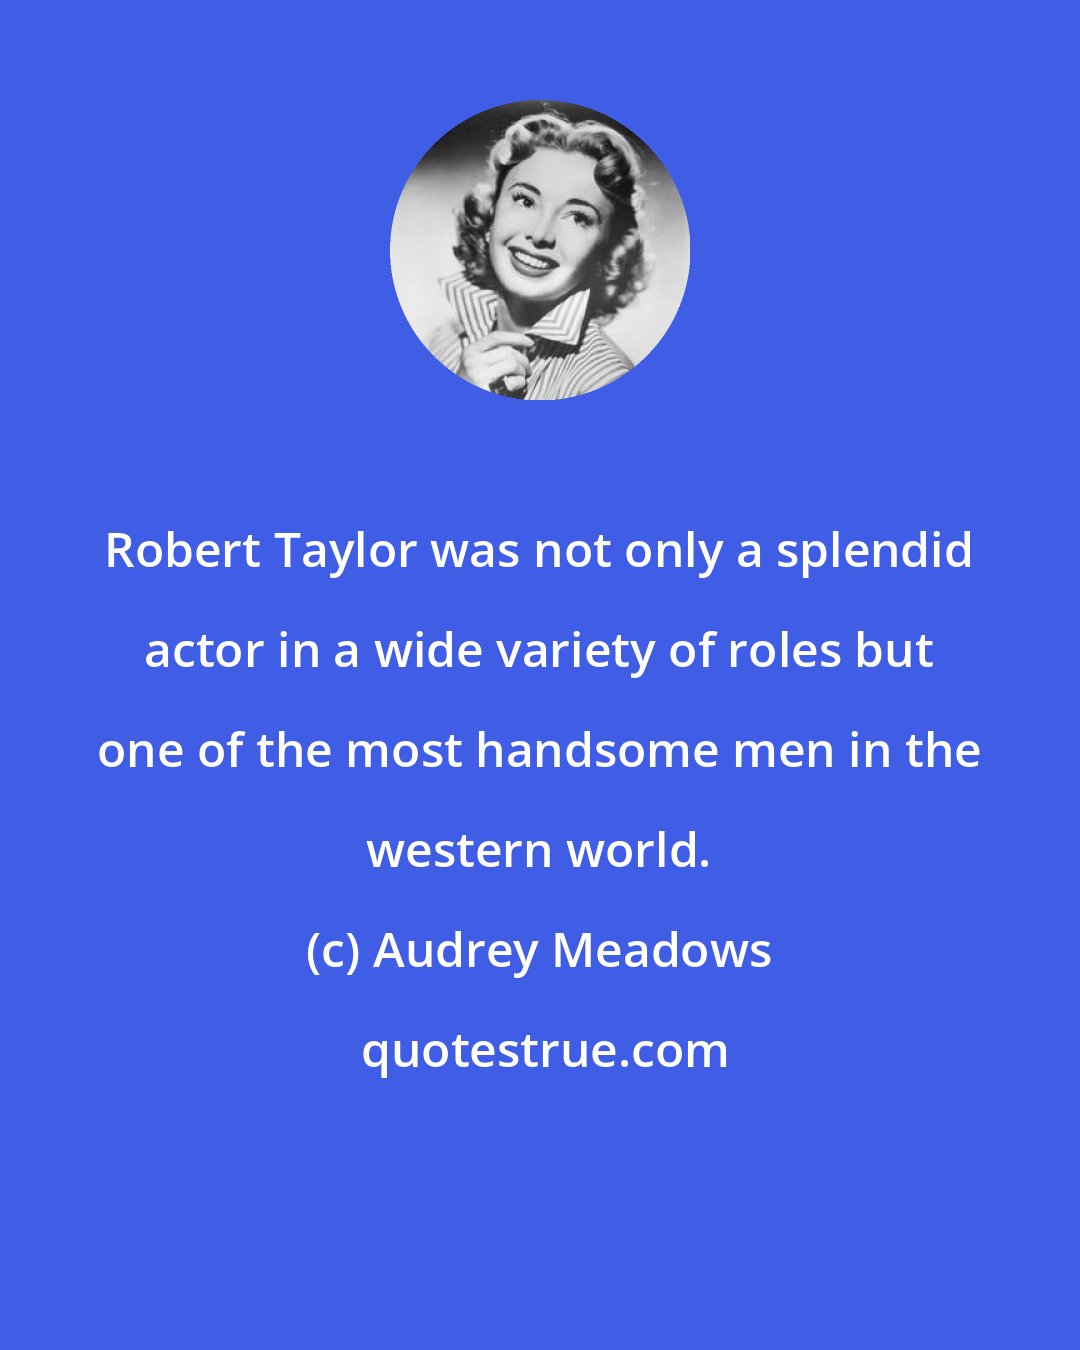 Audrey Meadows: Robert Taylor was not only a splendid actor in a wide variety of roles but one of the most handsome men in the western world.